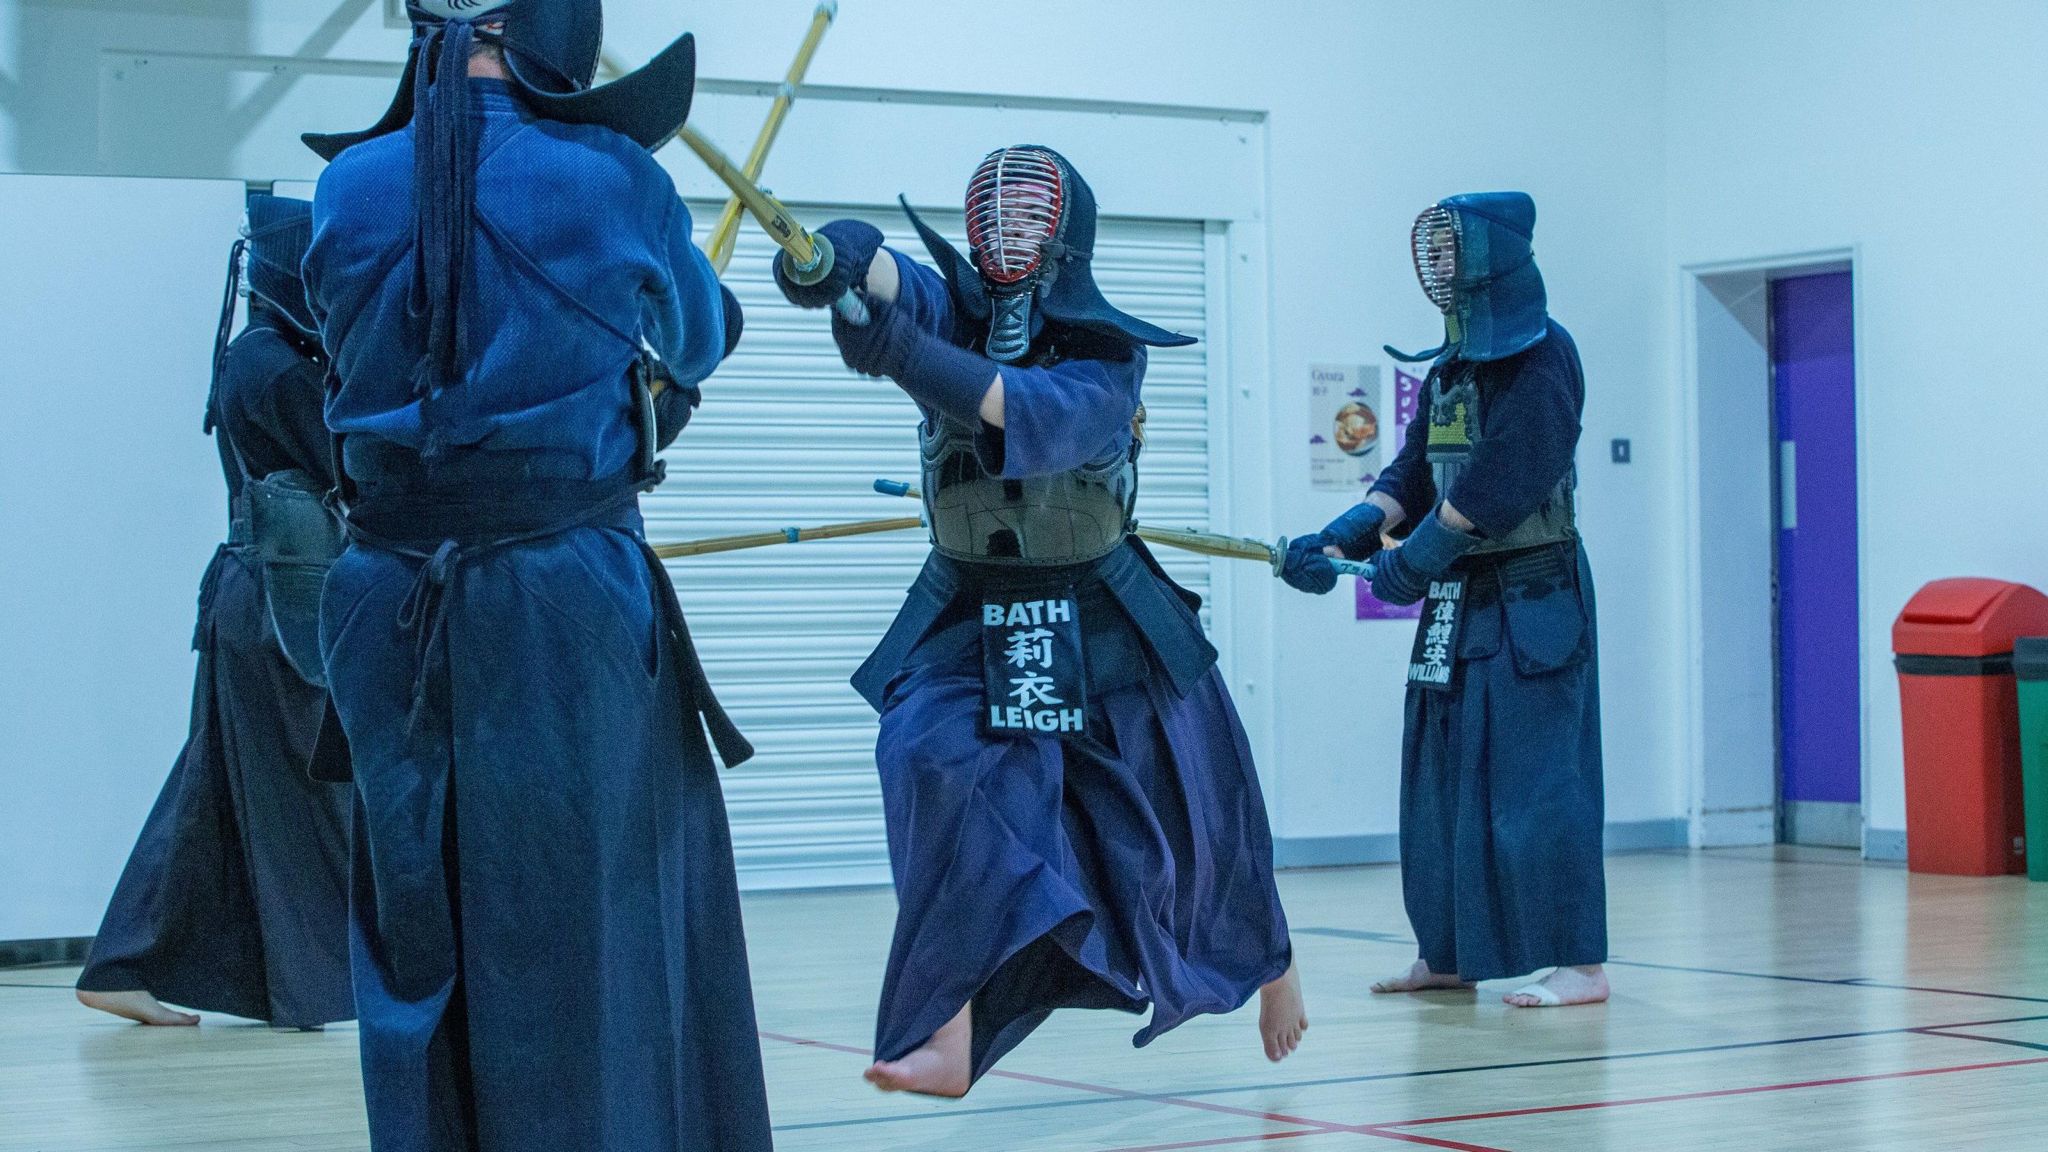 Chloe mid-fight while training. She is wearing her full dark blue Kendo uniform and caged helmet.